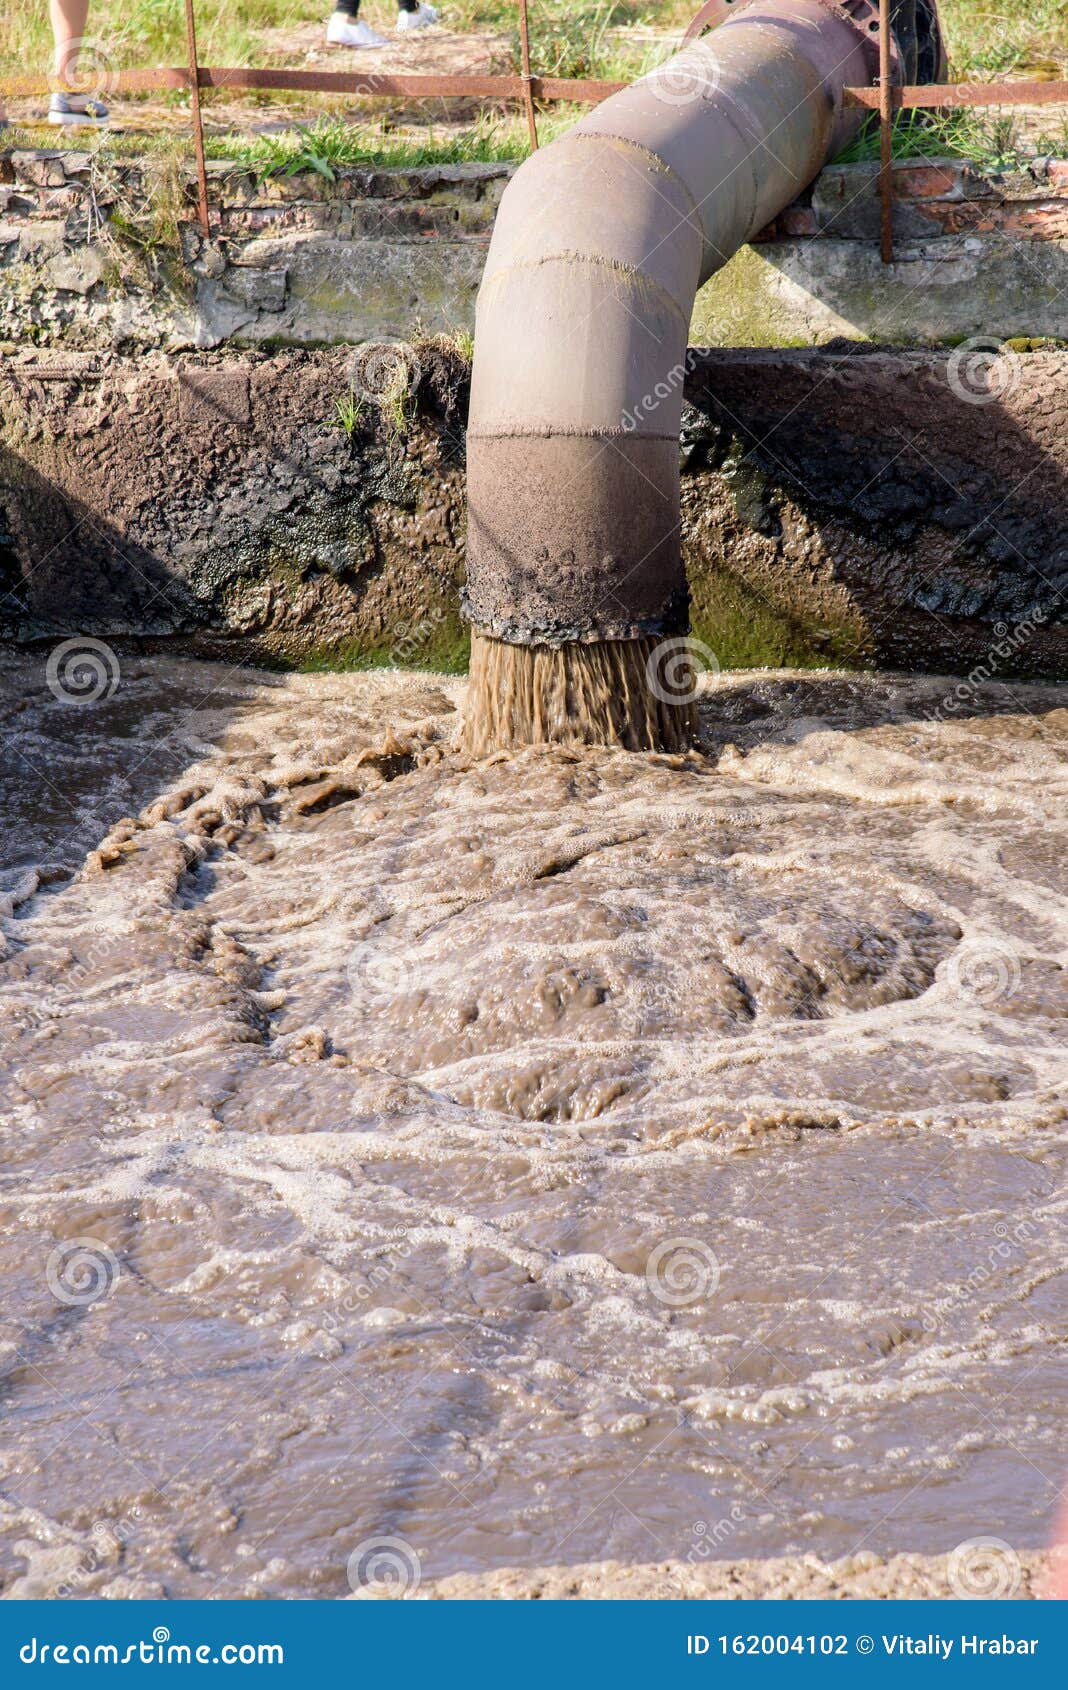 Water industrial pollution stock photo. Image of dirty - 162004102